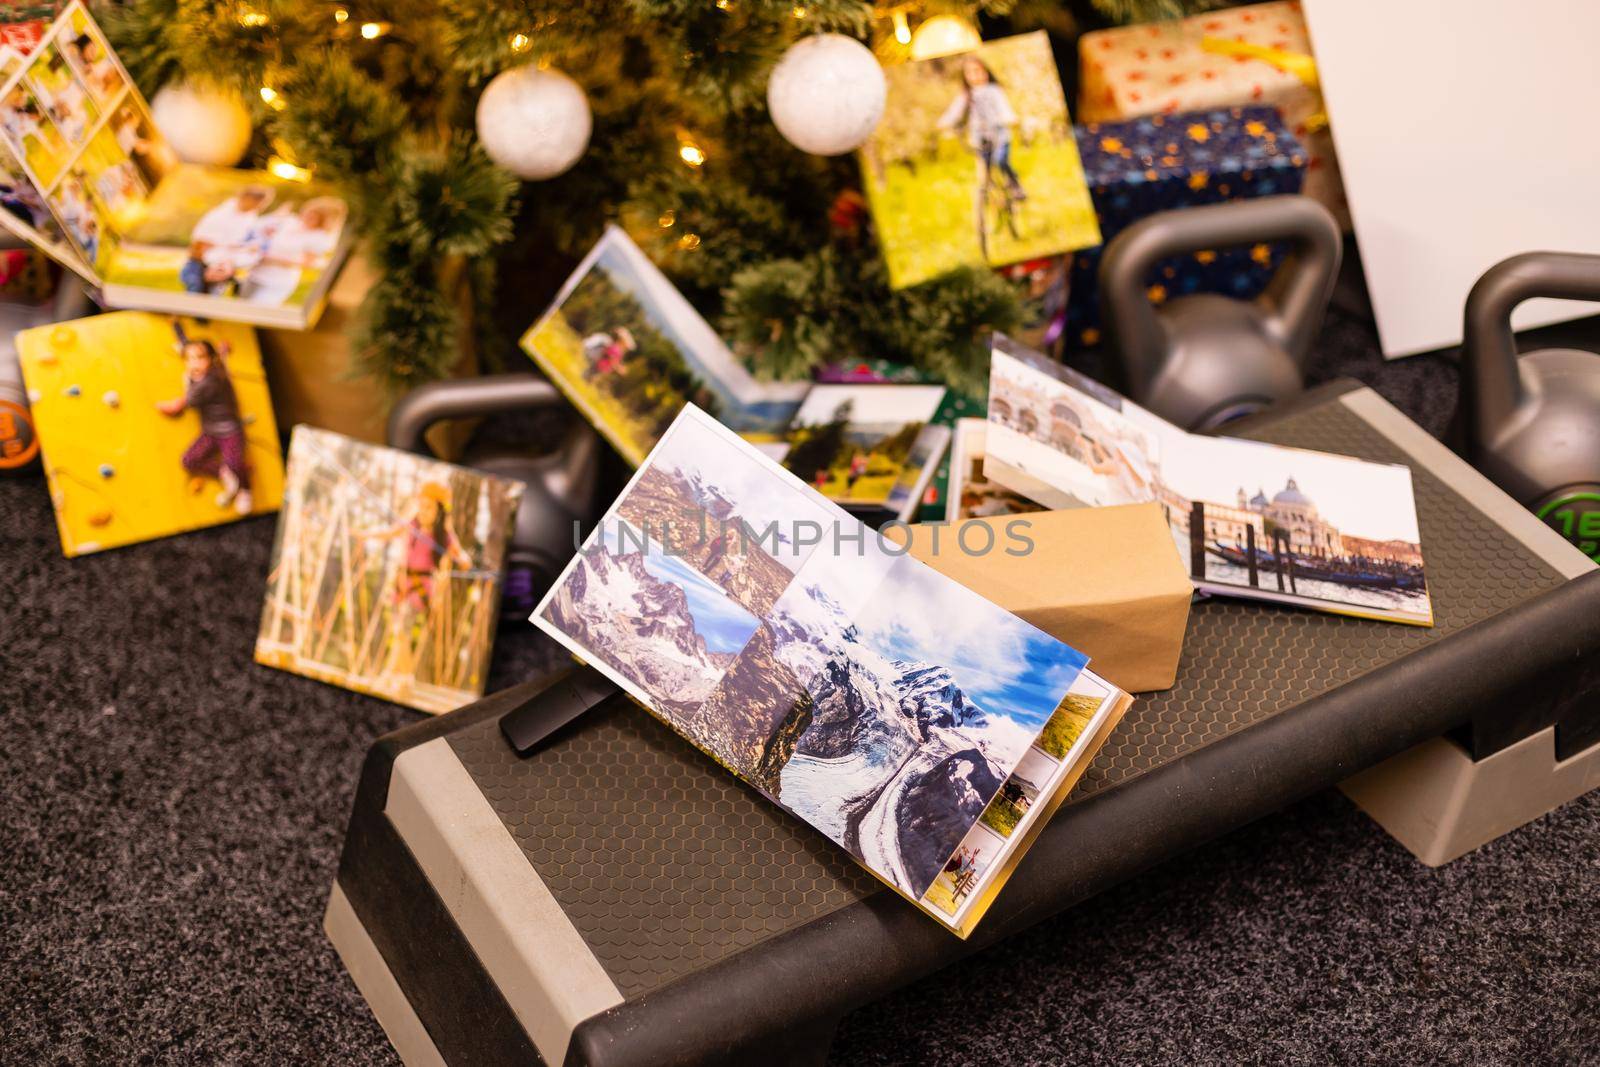 family photo album and weights for sports near the Christmas tree